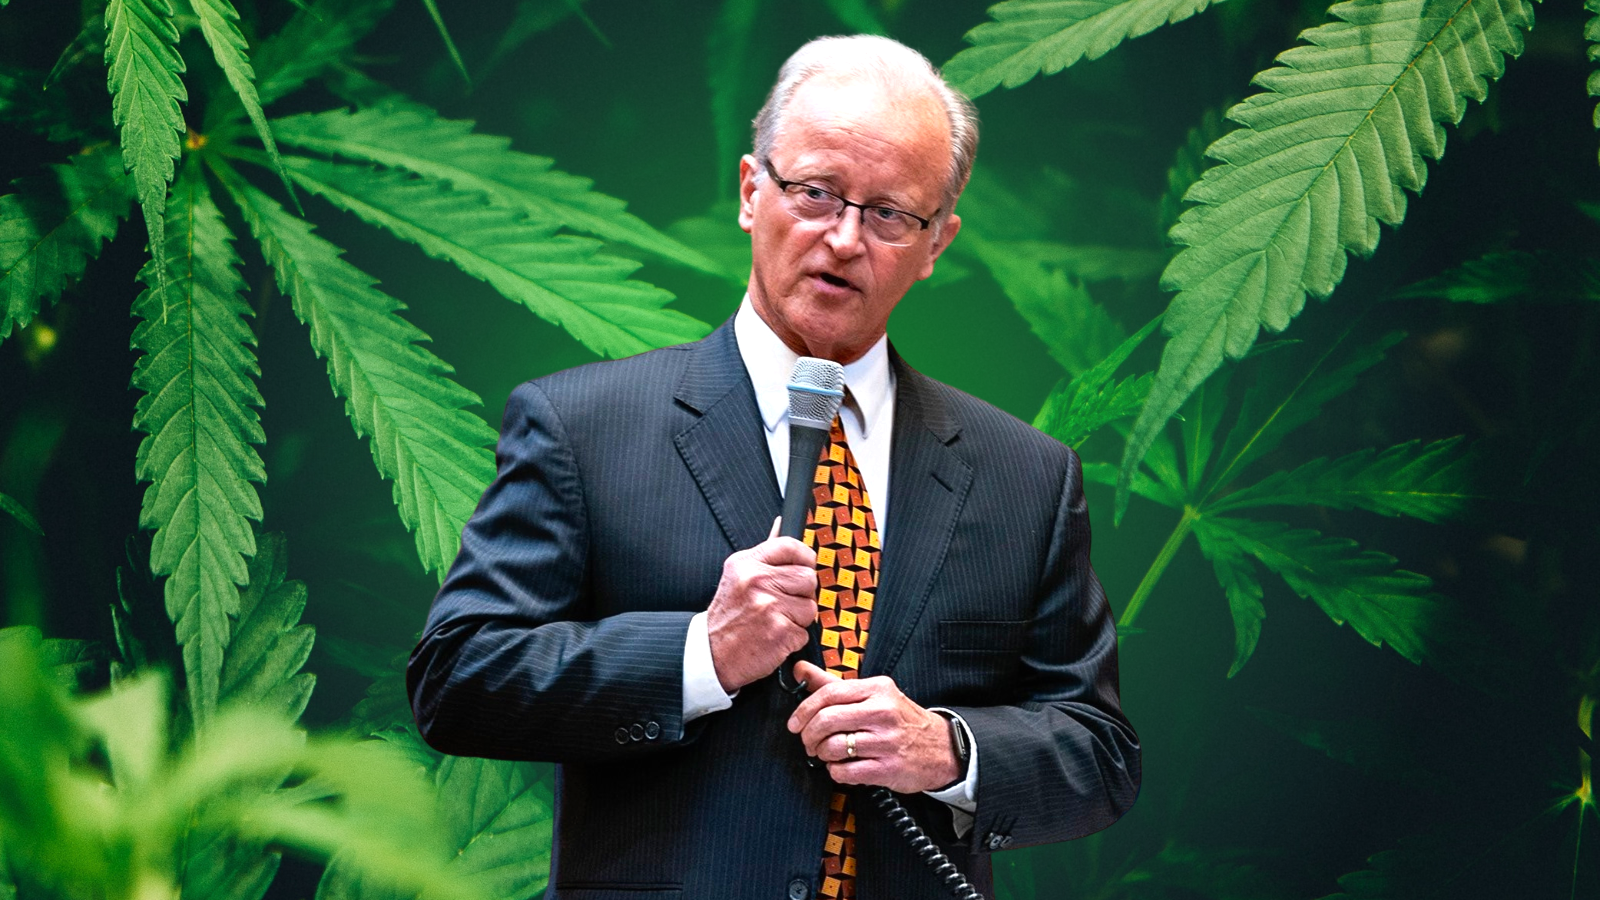 Senator Limmer’s Pot Problem: The Truth About Two Ounces Of Weed